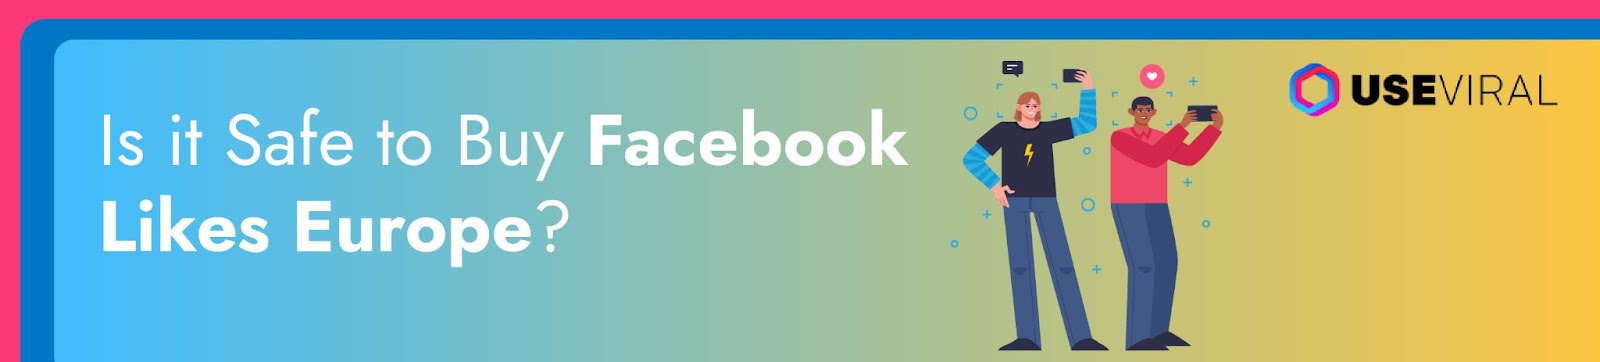 Is it Safe to Buy Facebook Likes Europe?